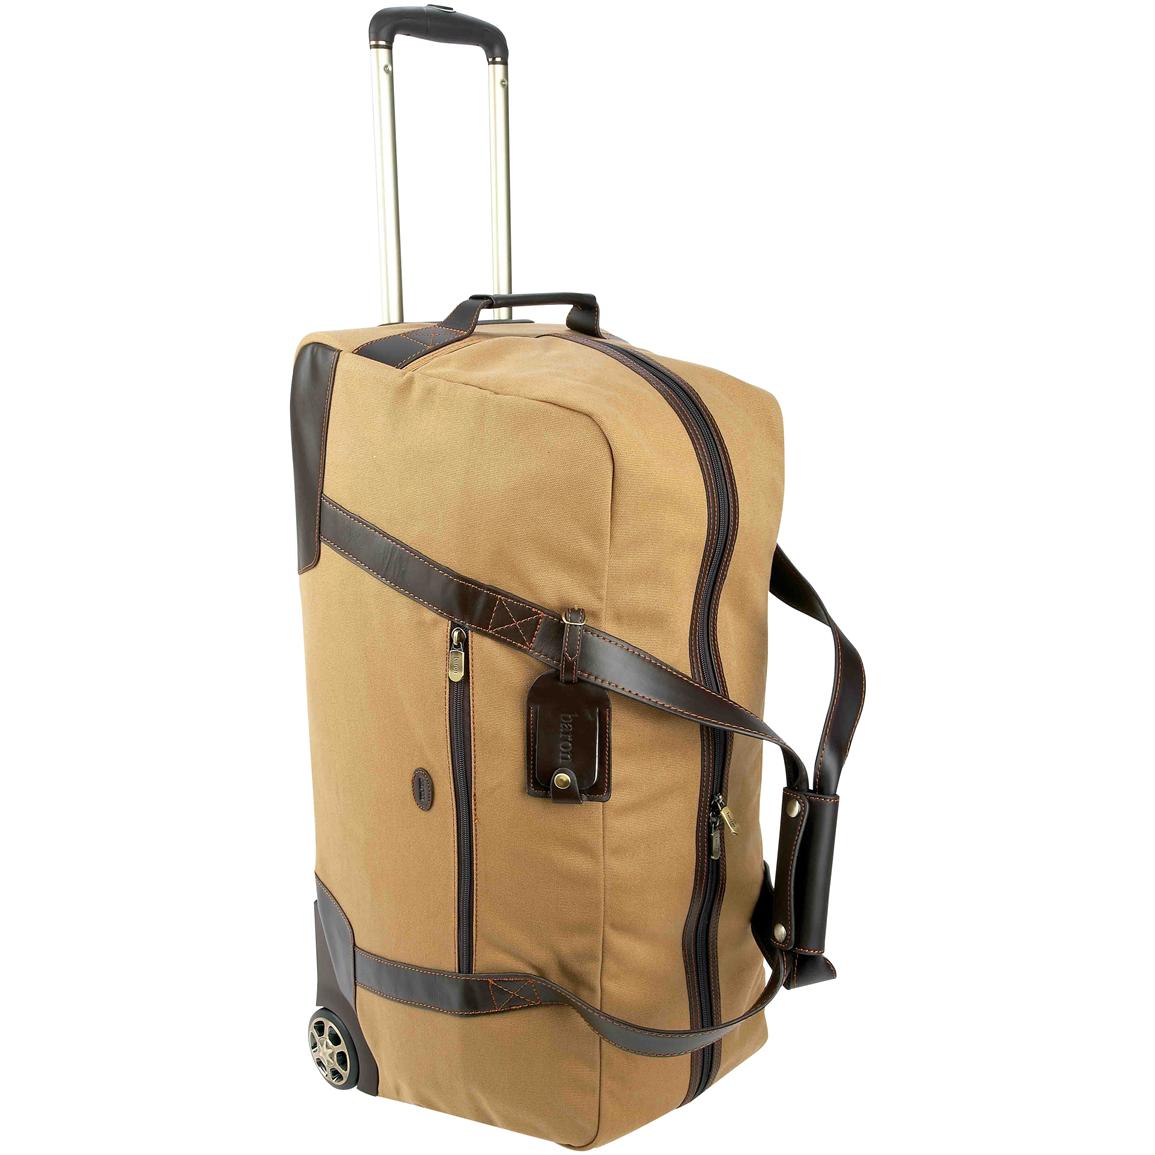 canvas duffle bag with wheels